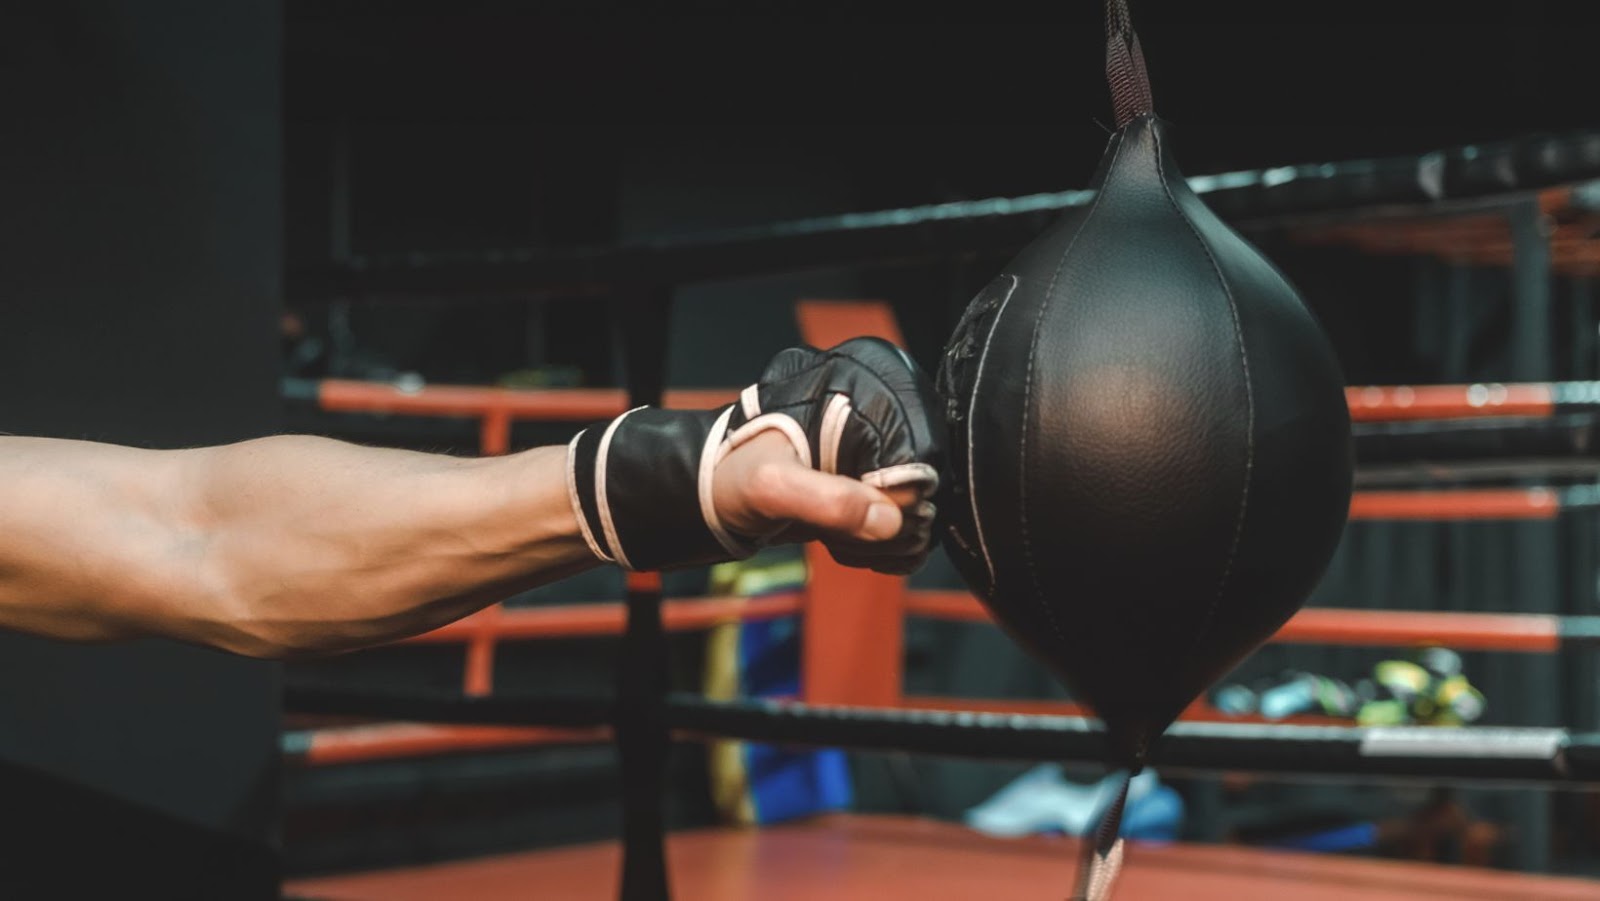 From Social Media Buzz to In-Play Betting: How Technology is Changing the Sport of Boxing